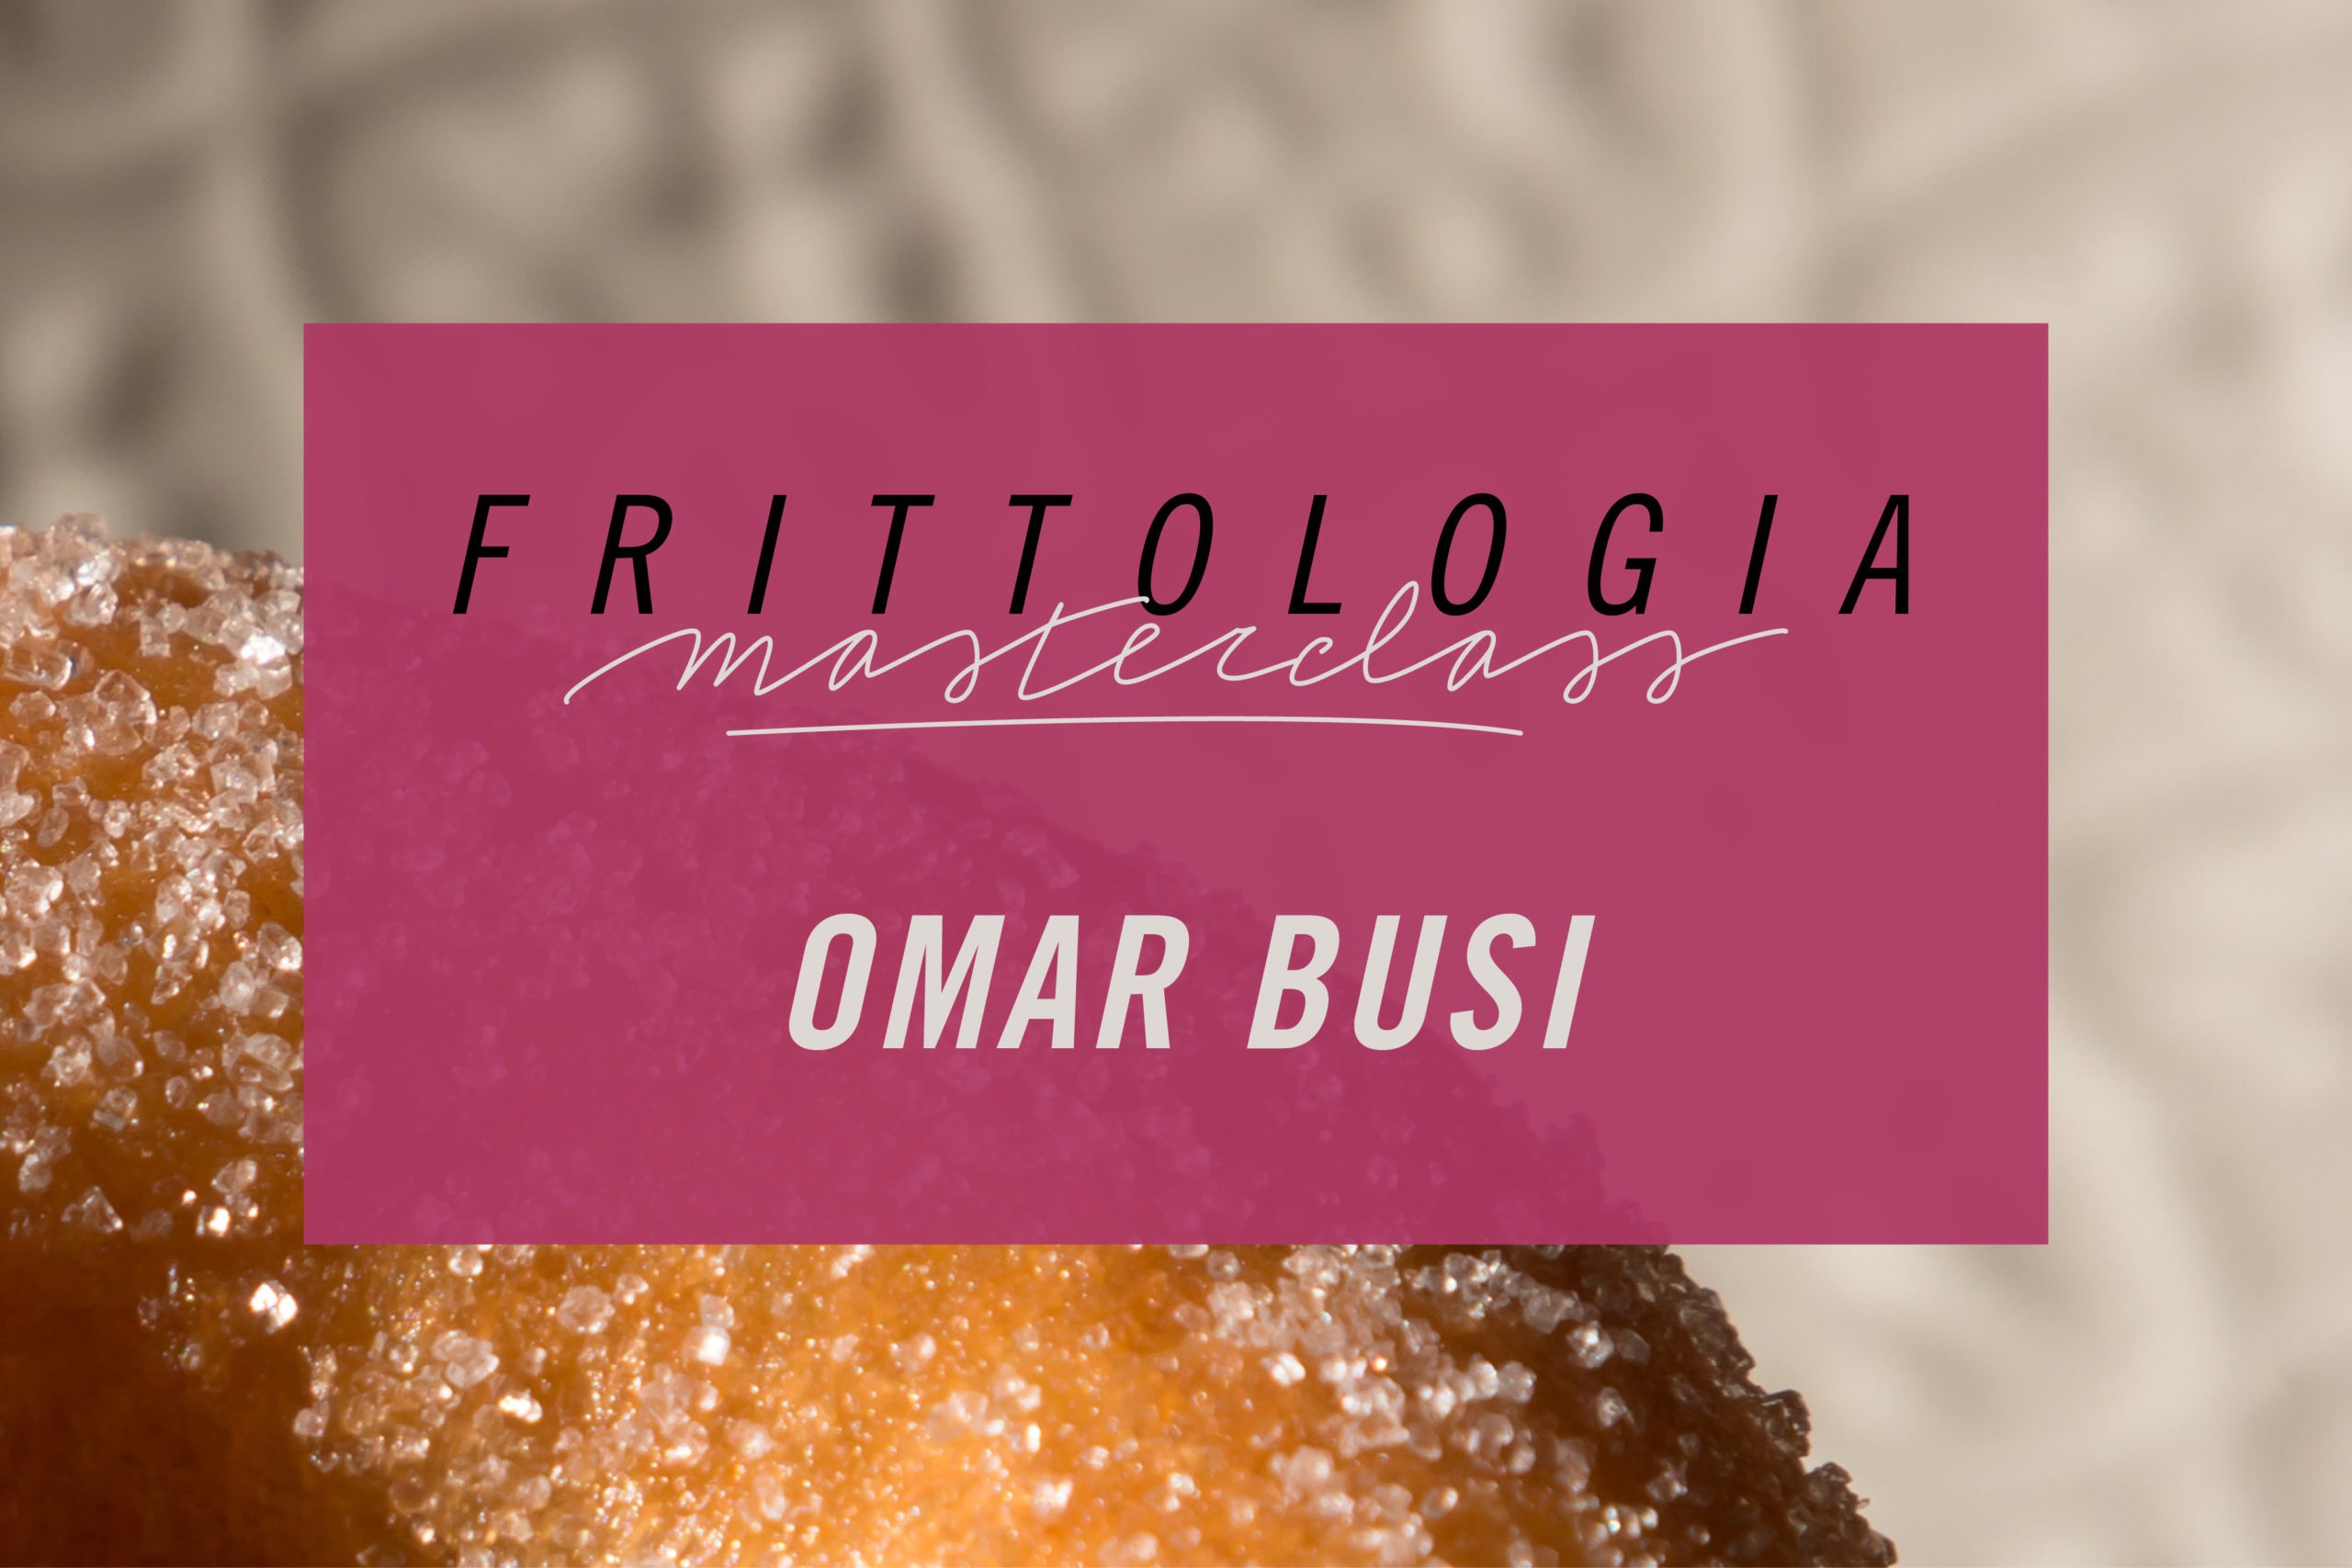 "FRITTOLOGIA", THE MASTERCLASS BY OMAR BUSI